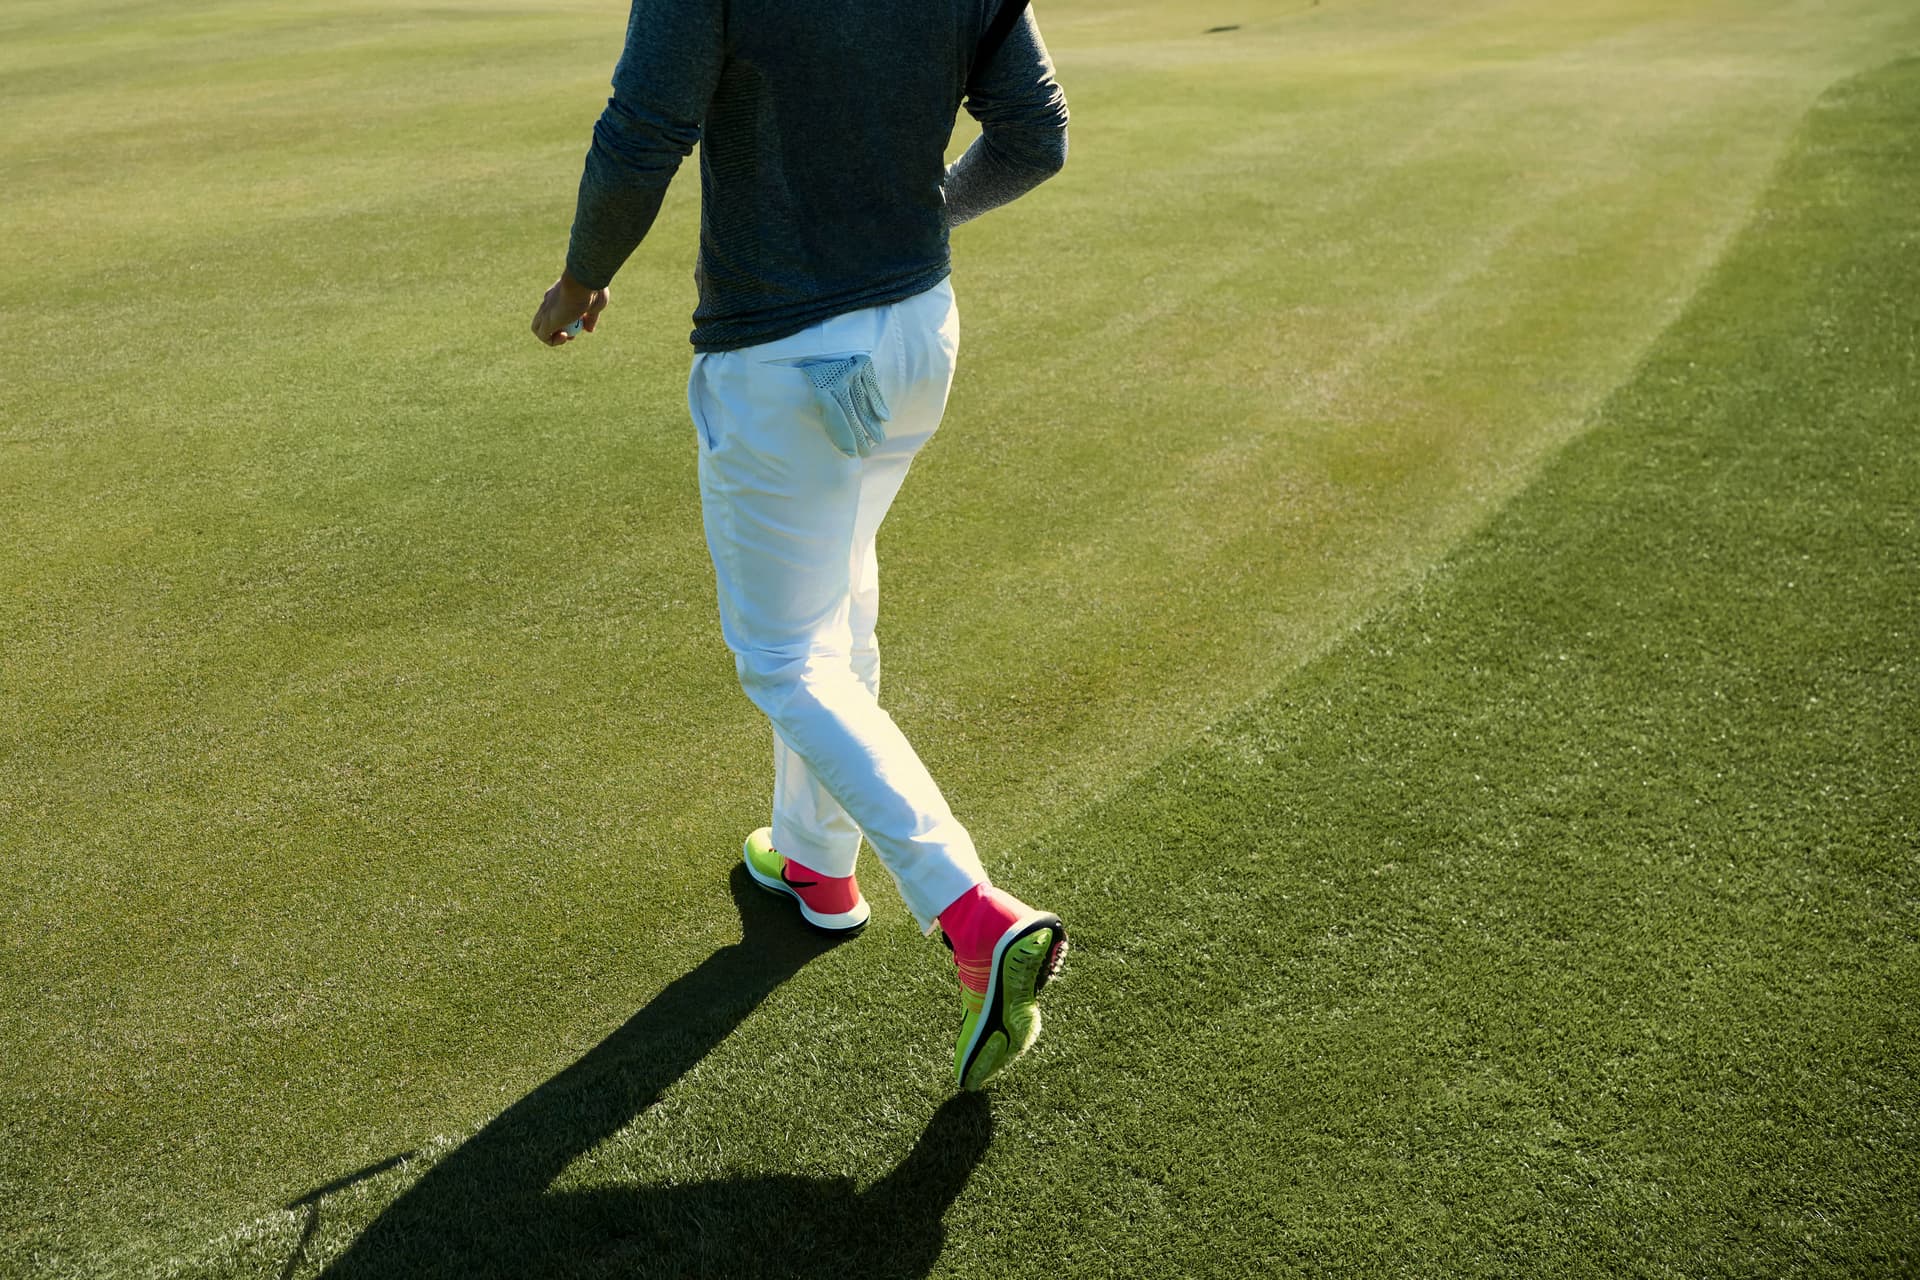 Slim Fit Winter Golf Trousers  2016 Buying Guide  Function18